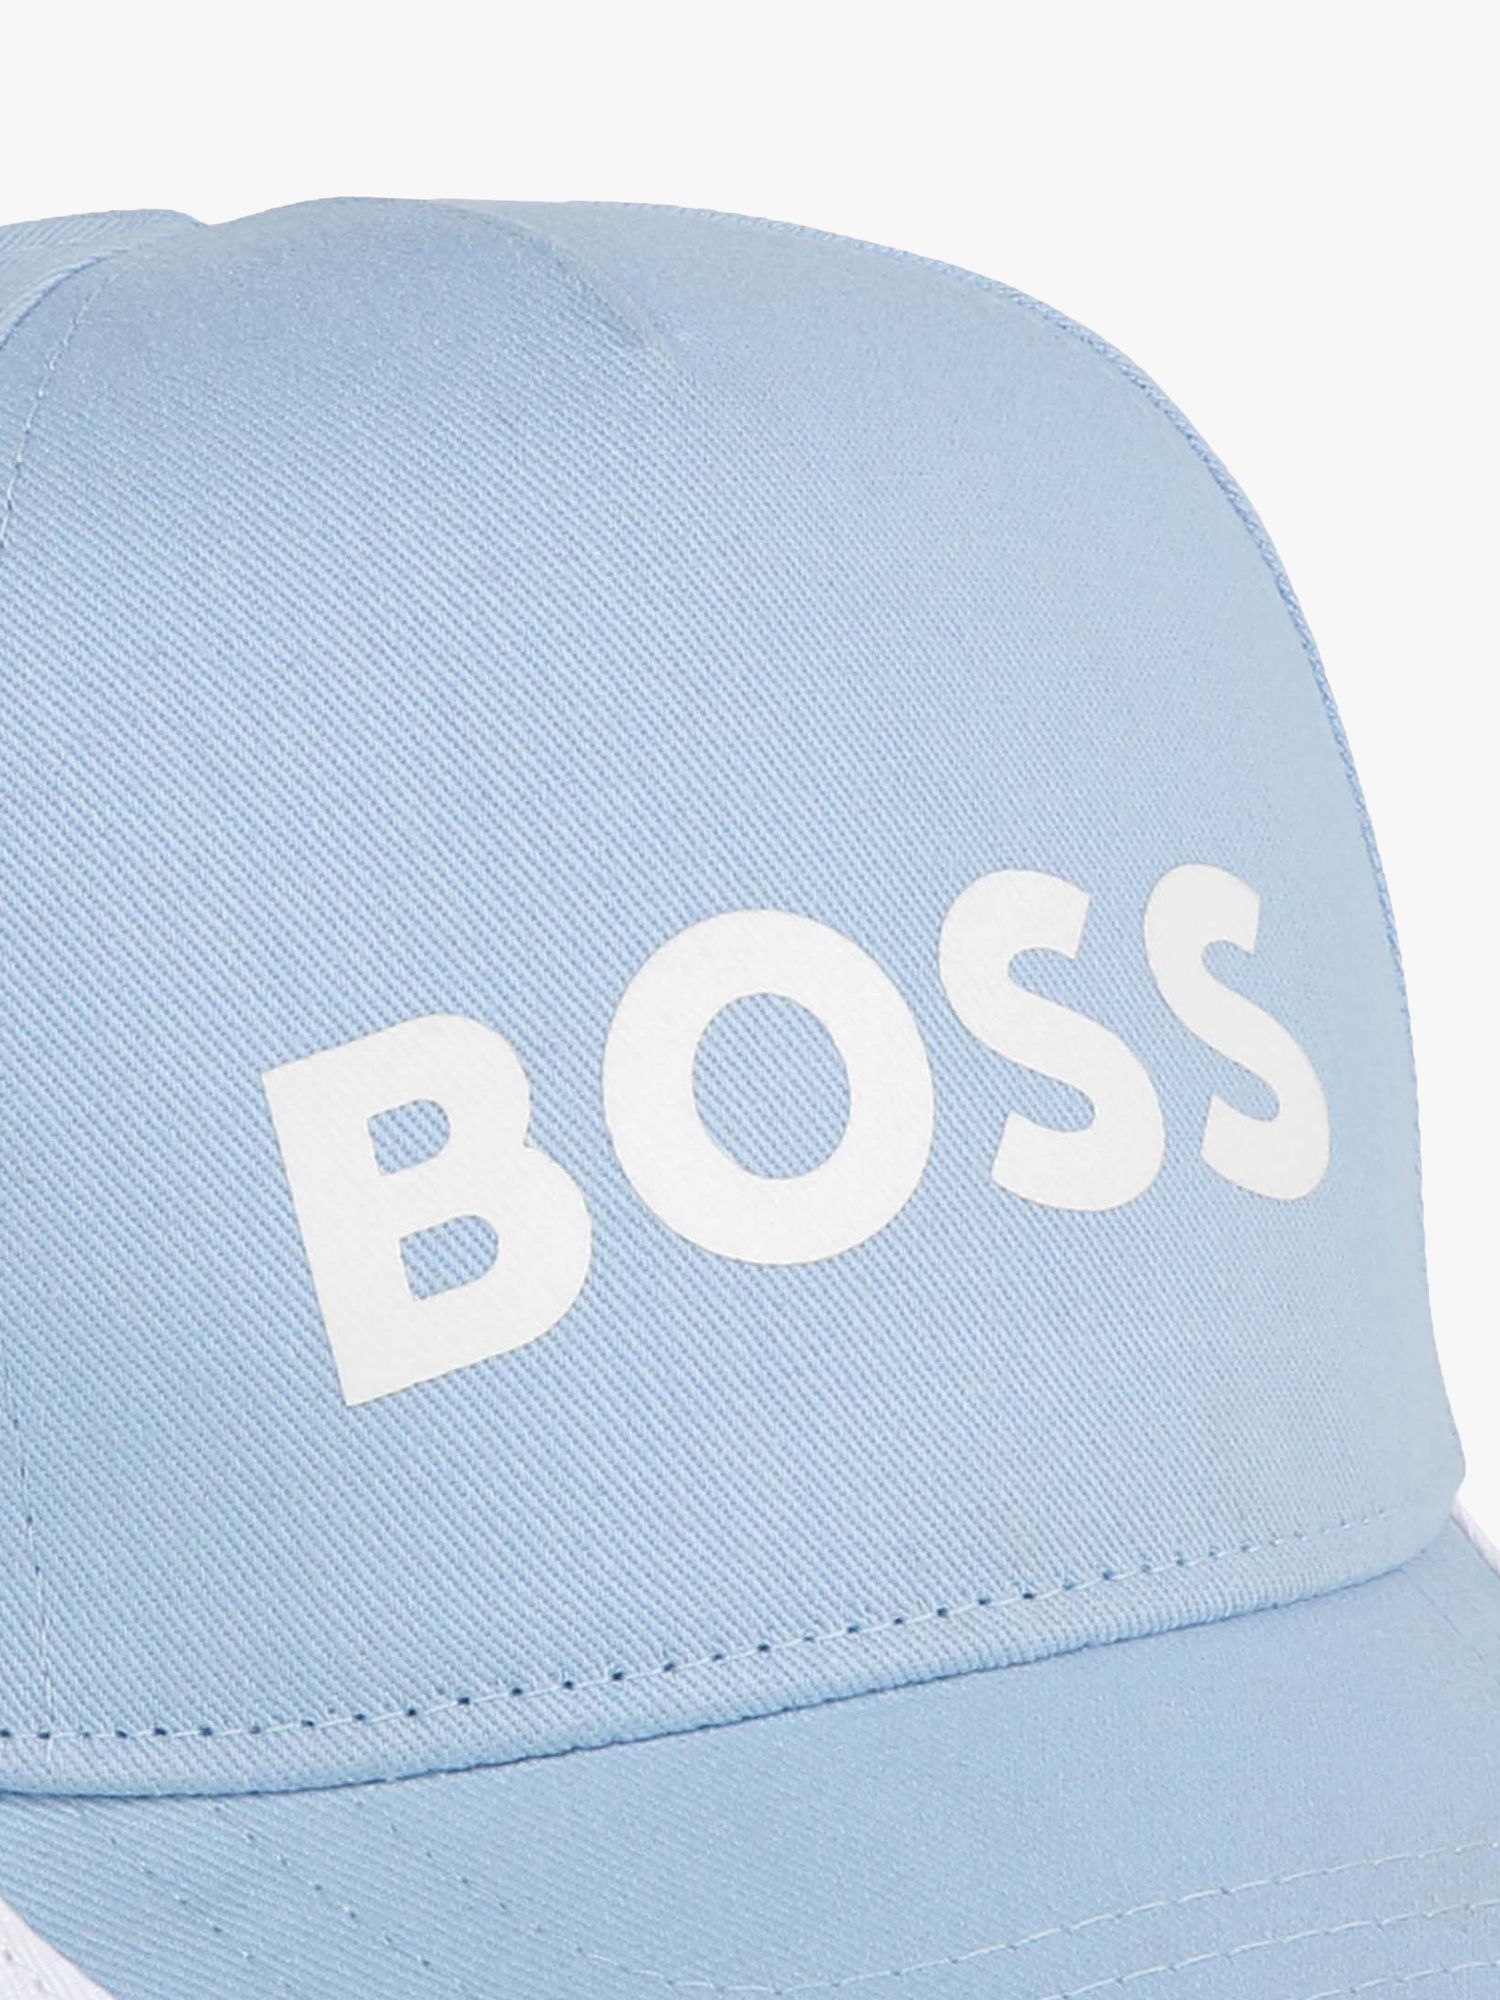 Buy BOSS Baby Logo Embroidered Baseball Hat Online at johnlewis.com